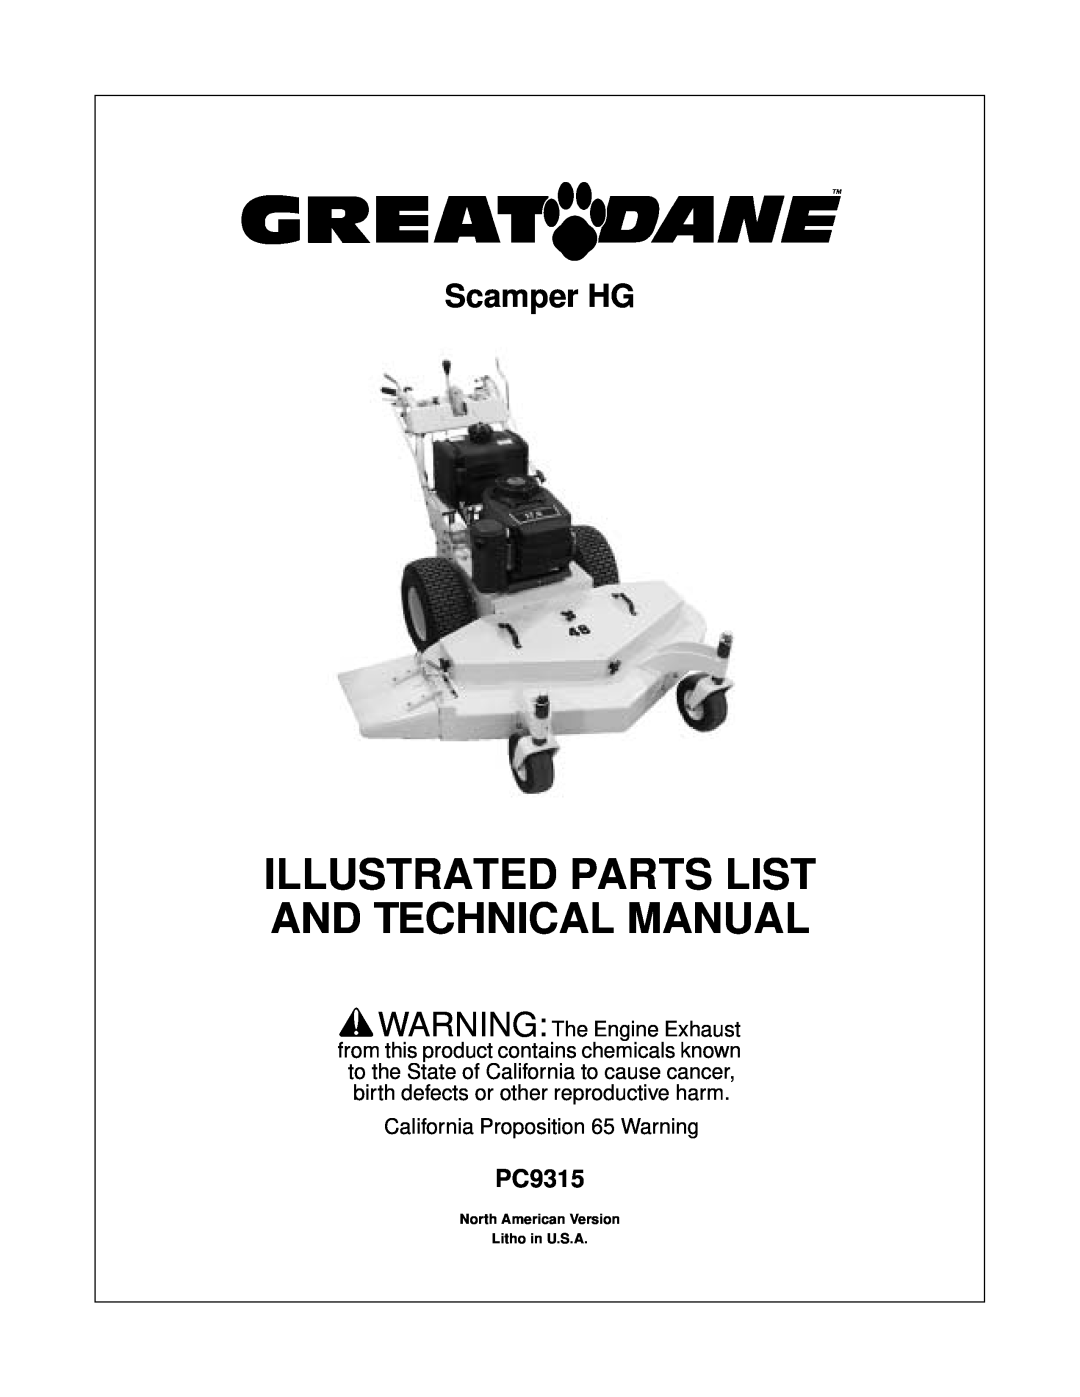 Great Dane TCHR48-17KA, TCHR52-17KA technical manual Illustrated Parts List And Technical Manual, Scamper HG, PC9315 